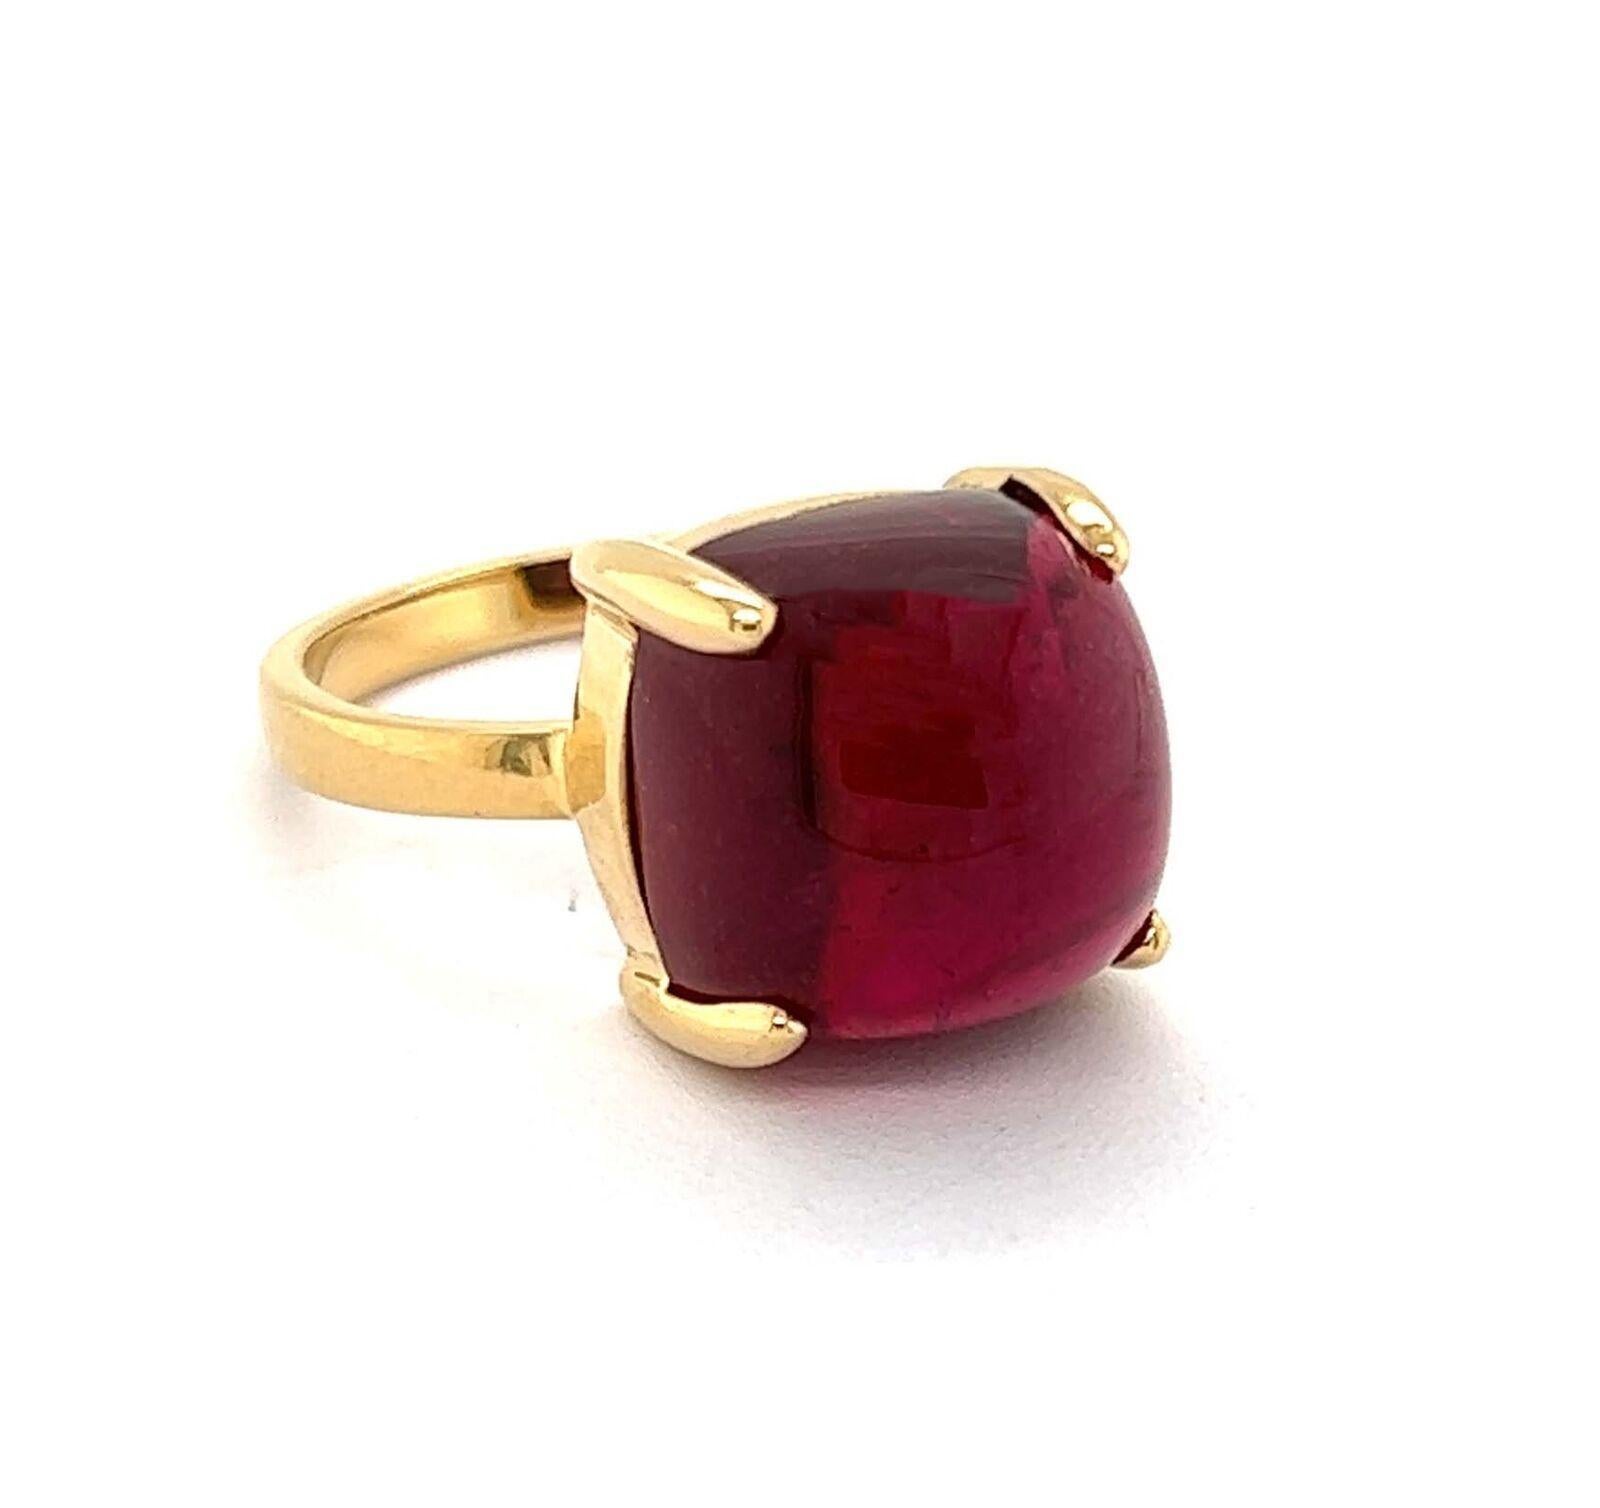 Brand:  Tiffany & Co.
Hallmark: Tiffany & Co. 750 Paloma Picasso
Gemstone: 8.00ct rubellite 12mm x 12mm
Material:  18k yellow gold
Measurement: 12.3mm x 12.3mm x 10mm high
Ring size:  7
Weight: 7.7 grams

This is a lovely authentic solitaire stone